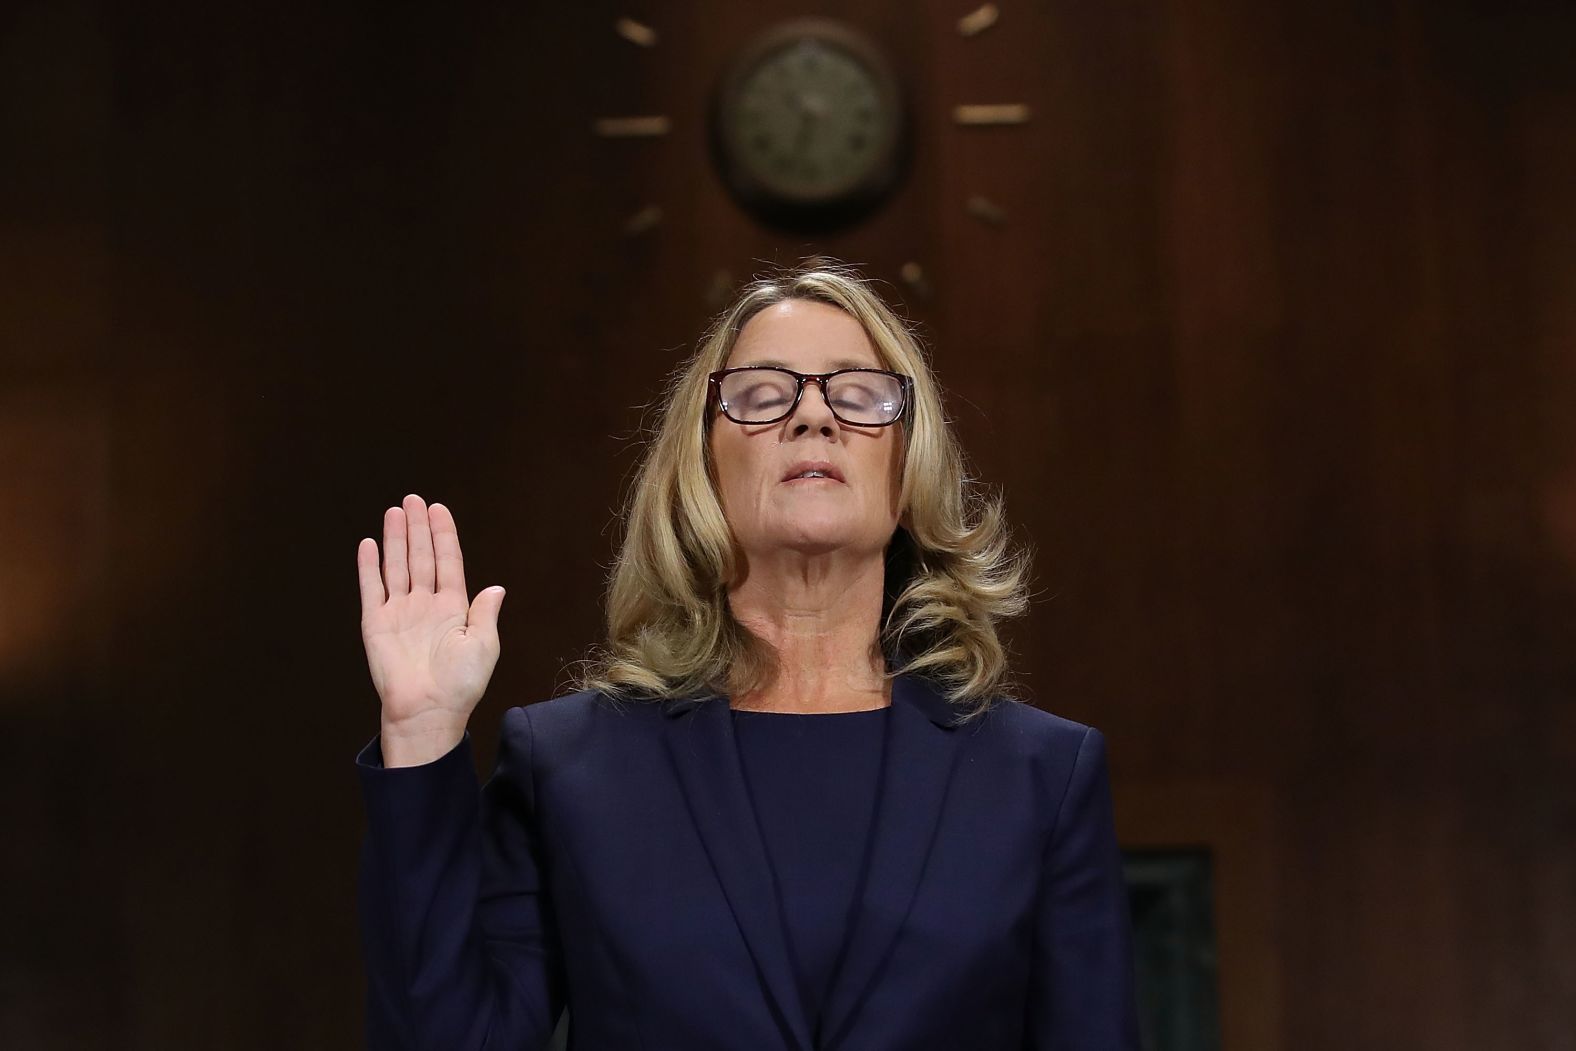 Christine Blasey Ford, who accused US Supreme Court nominee Brett Kavanaugh of sexual assault, is sworn in before testifying to the Senate Judiciary Committee in September 2018. She and Kavanaugh <a href="https://www.cnn.com/2018/09/27/politics/gallery/kavanaugh-ford-hearing/index.html" target="_blank">both gave emotional statements to the committee</a> and took questions from its members. Ford said the incident took place in the 1980s, when the two were at a party during their high-school years. Kavanaugh repeatedly denied the allegation and said he was facing a politically motivated "smear campaign." <a href="https://www.cnn.com/interactive/2018/10/politics/timeline-kavanaugh/" target="_blank">He was sworn in a month later</a> after being confirmed by a vote of 50-48.